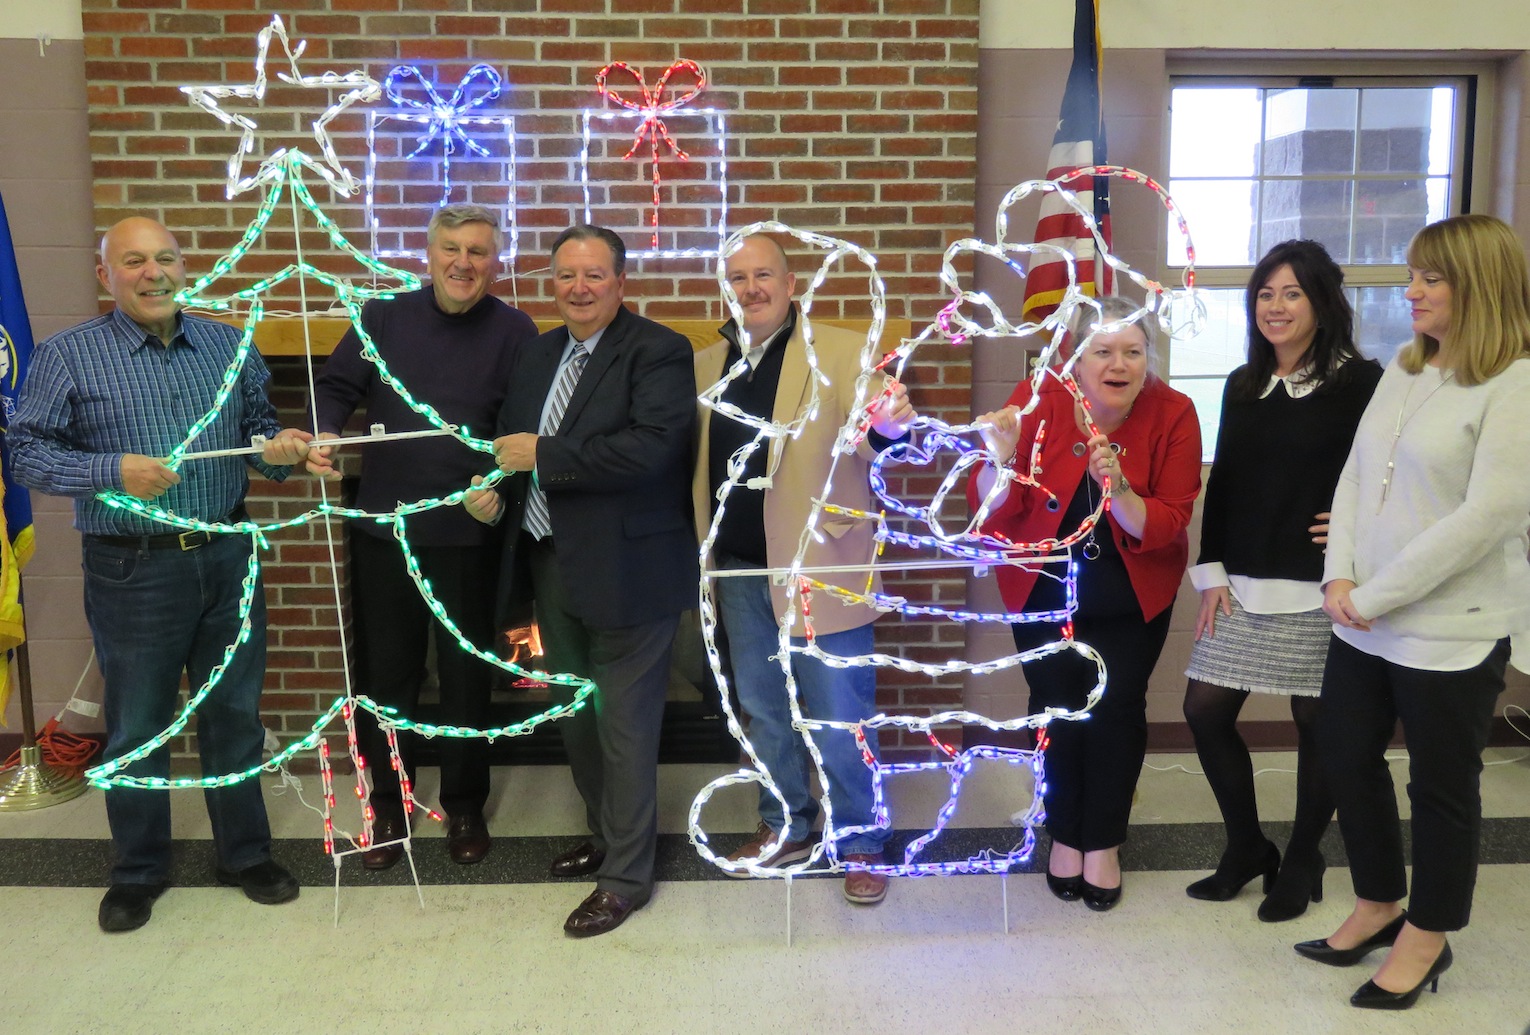 From left, Assemblyman Angelo Morinello, Jerry Wolfgang, Town of Niagara Supervisor Lee Wallace, Chris Woods, Janiene Ennis-Garcia, Meghan Ayers and Suzanne Kennedy pose with some of the lighting displays for this year's `Noel at Niagara.` (Photo by David Yarger)